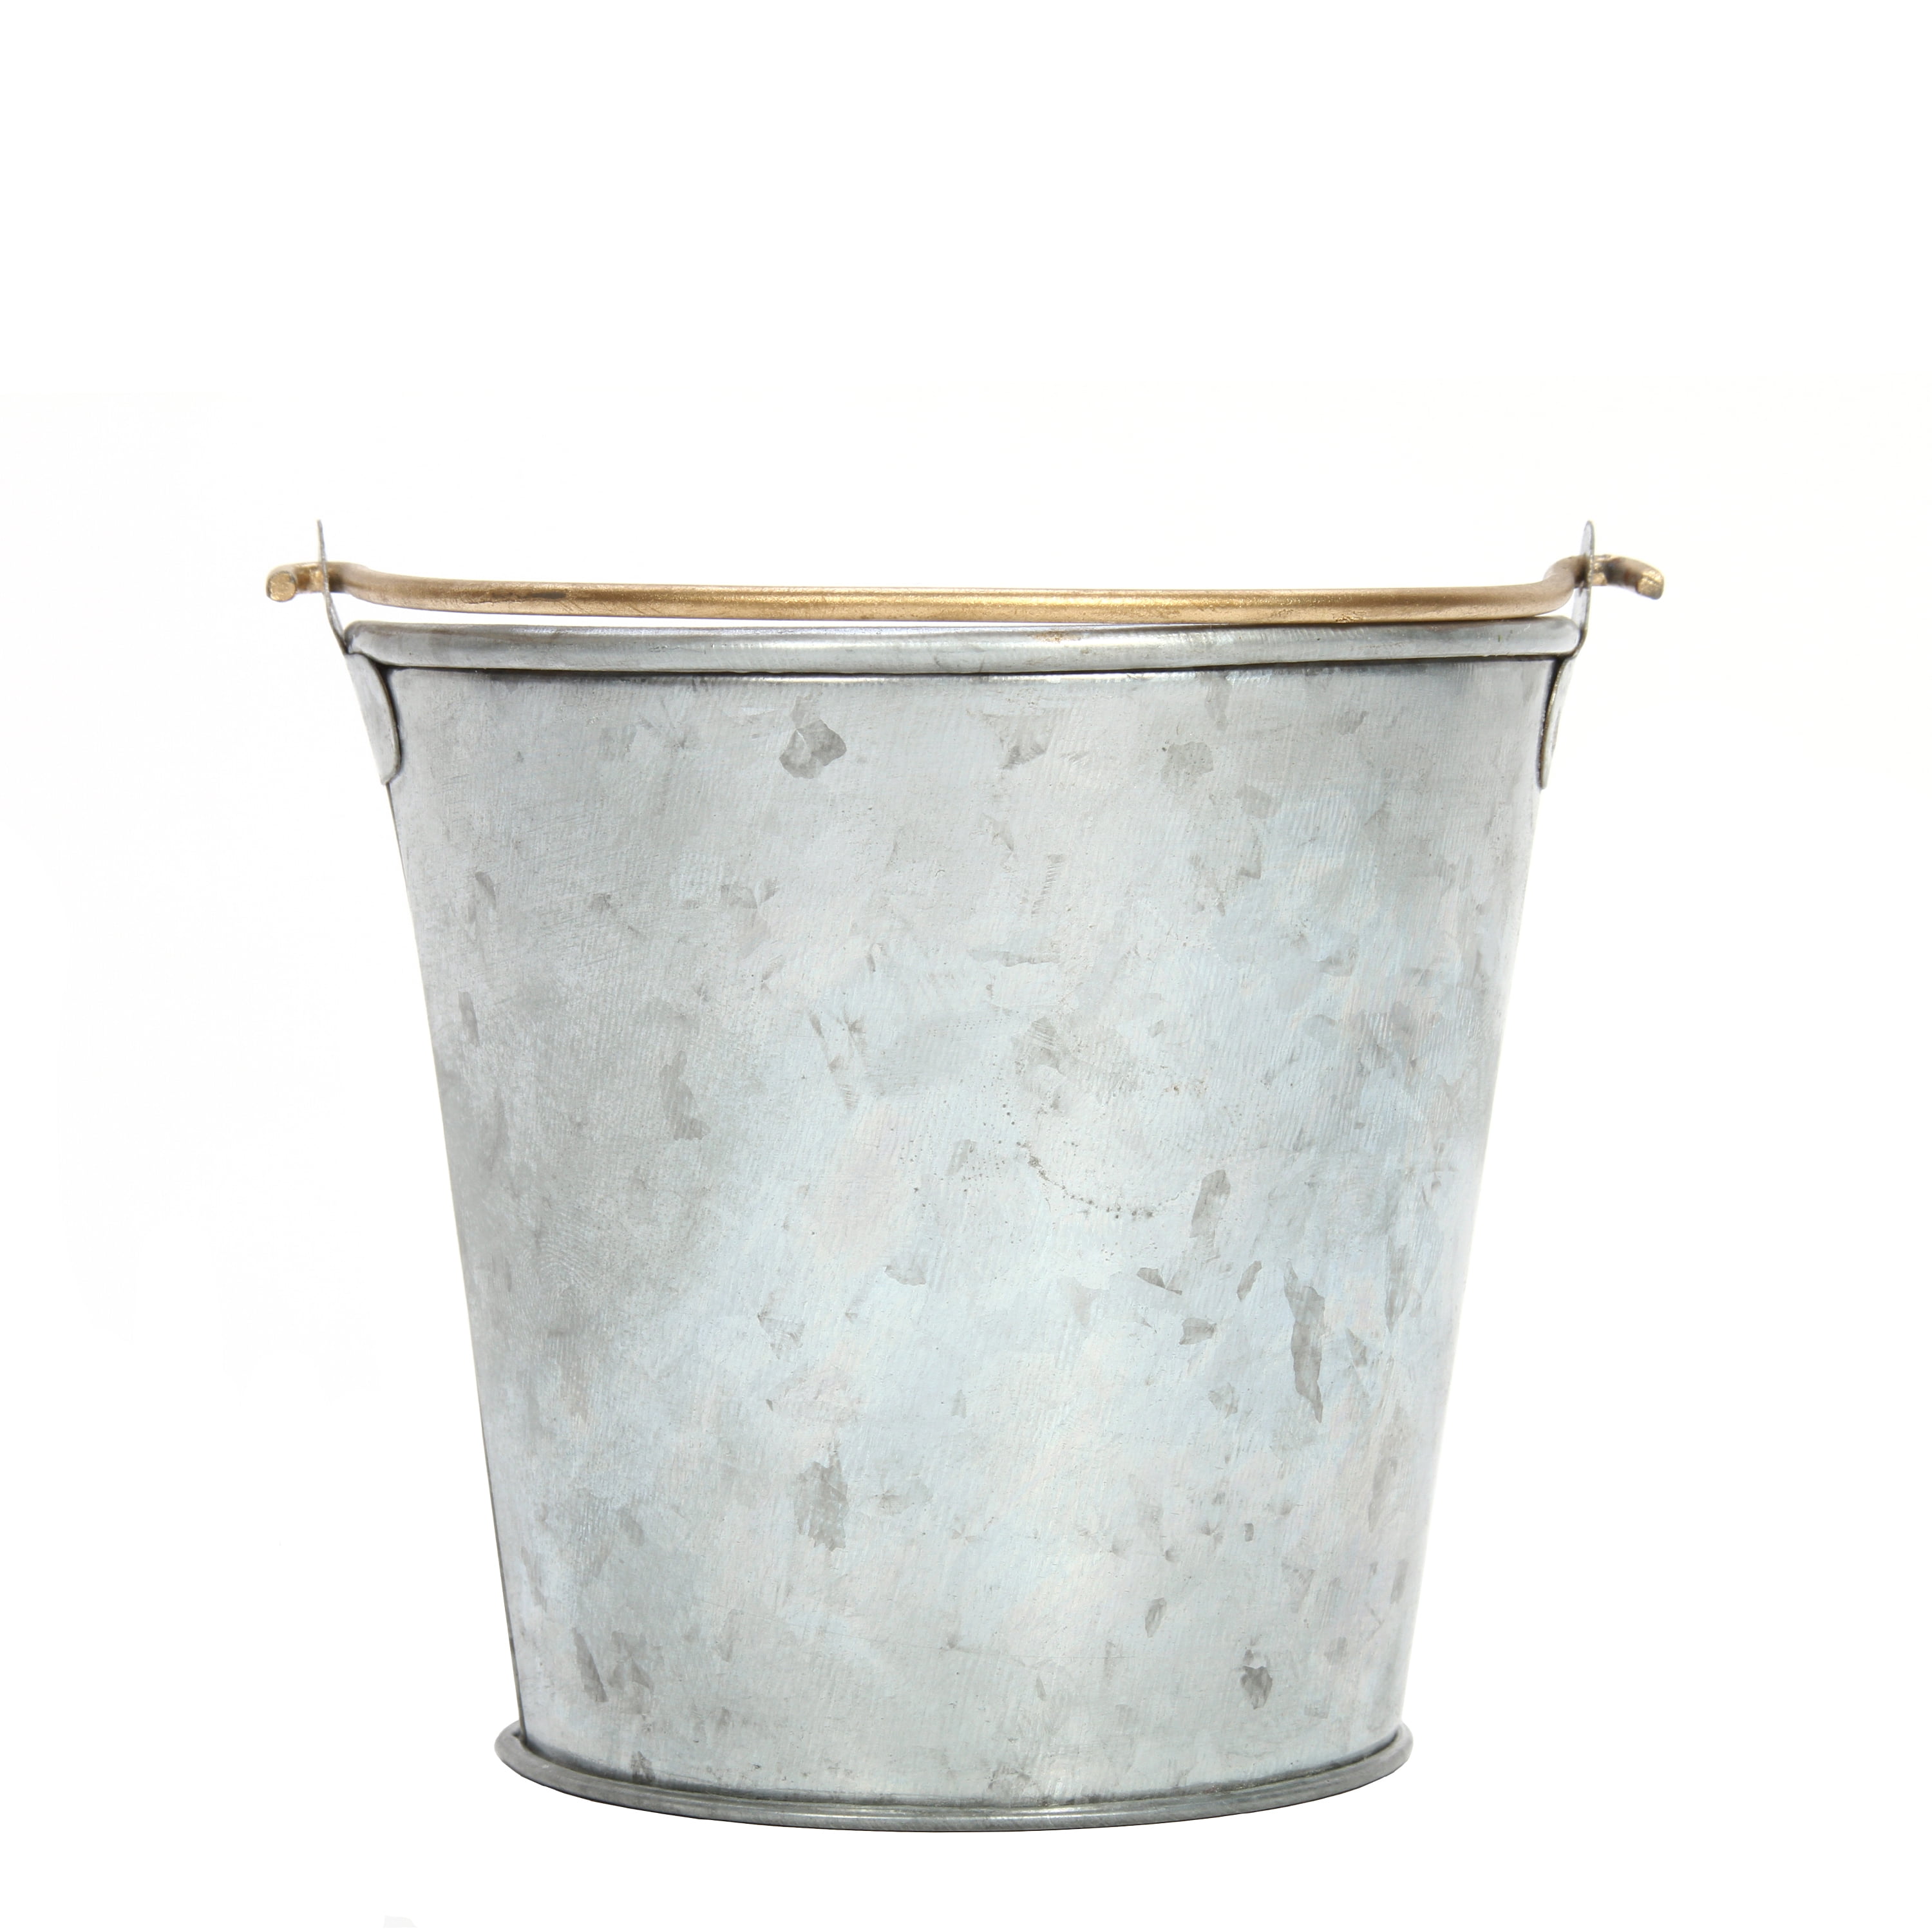 Way to Celebrate Galvanized Bucket with Gold Handle, 4"